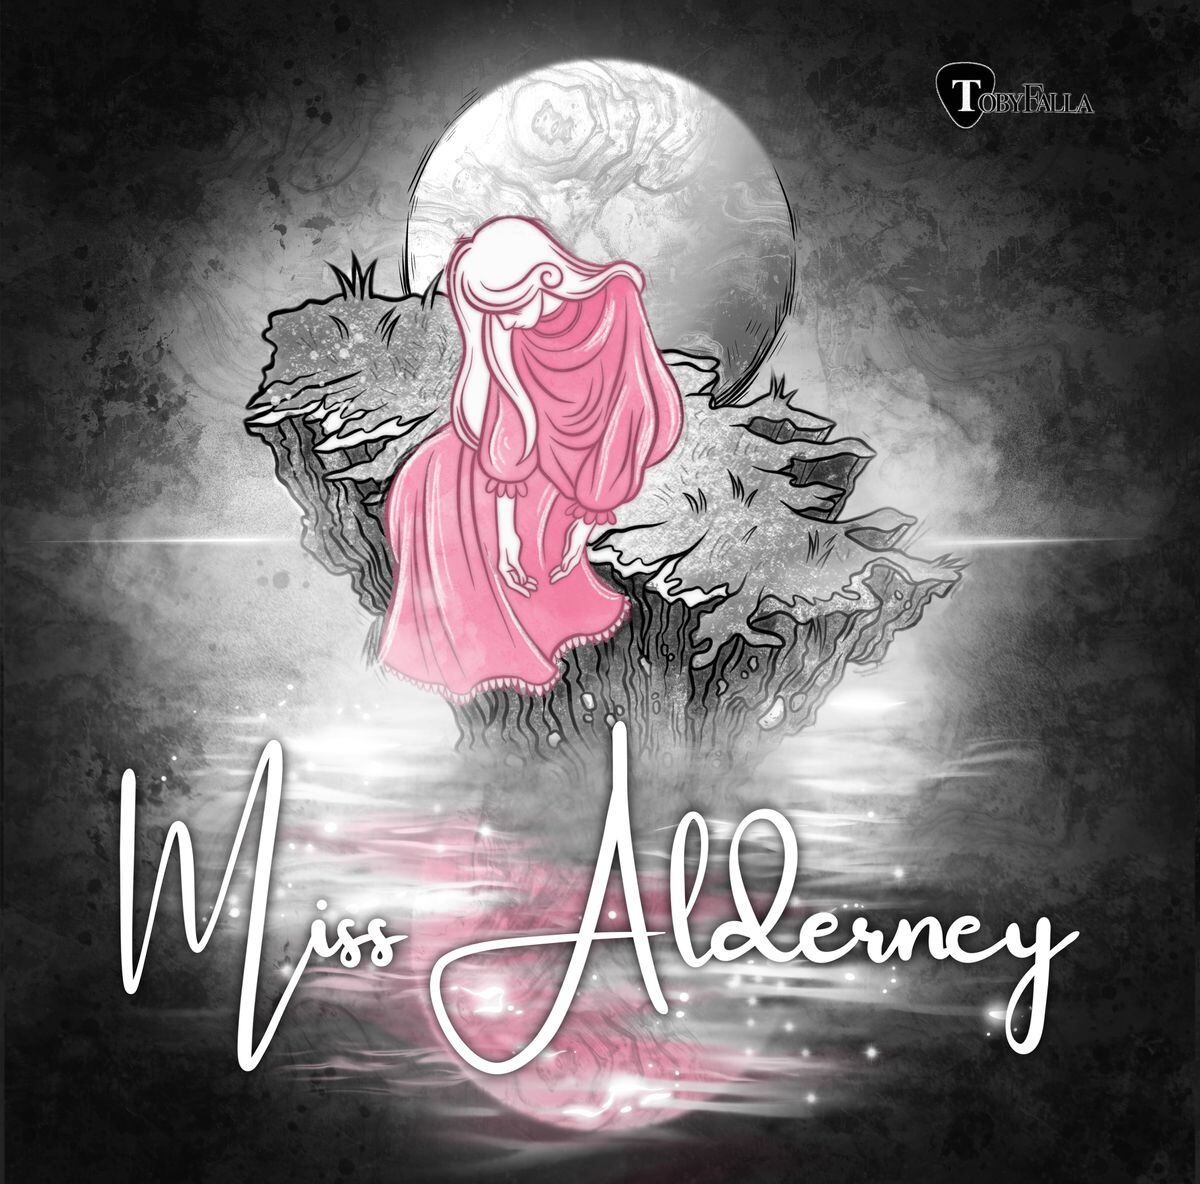 The cover of the physical Miss Alderney single was produced by a local artist known as Milly.